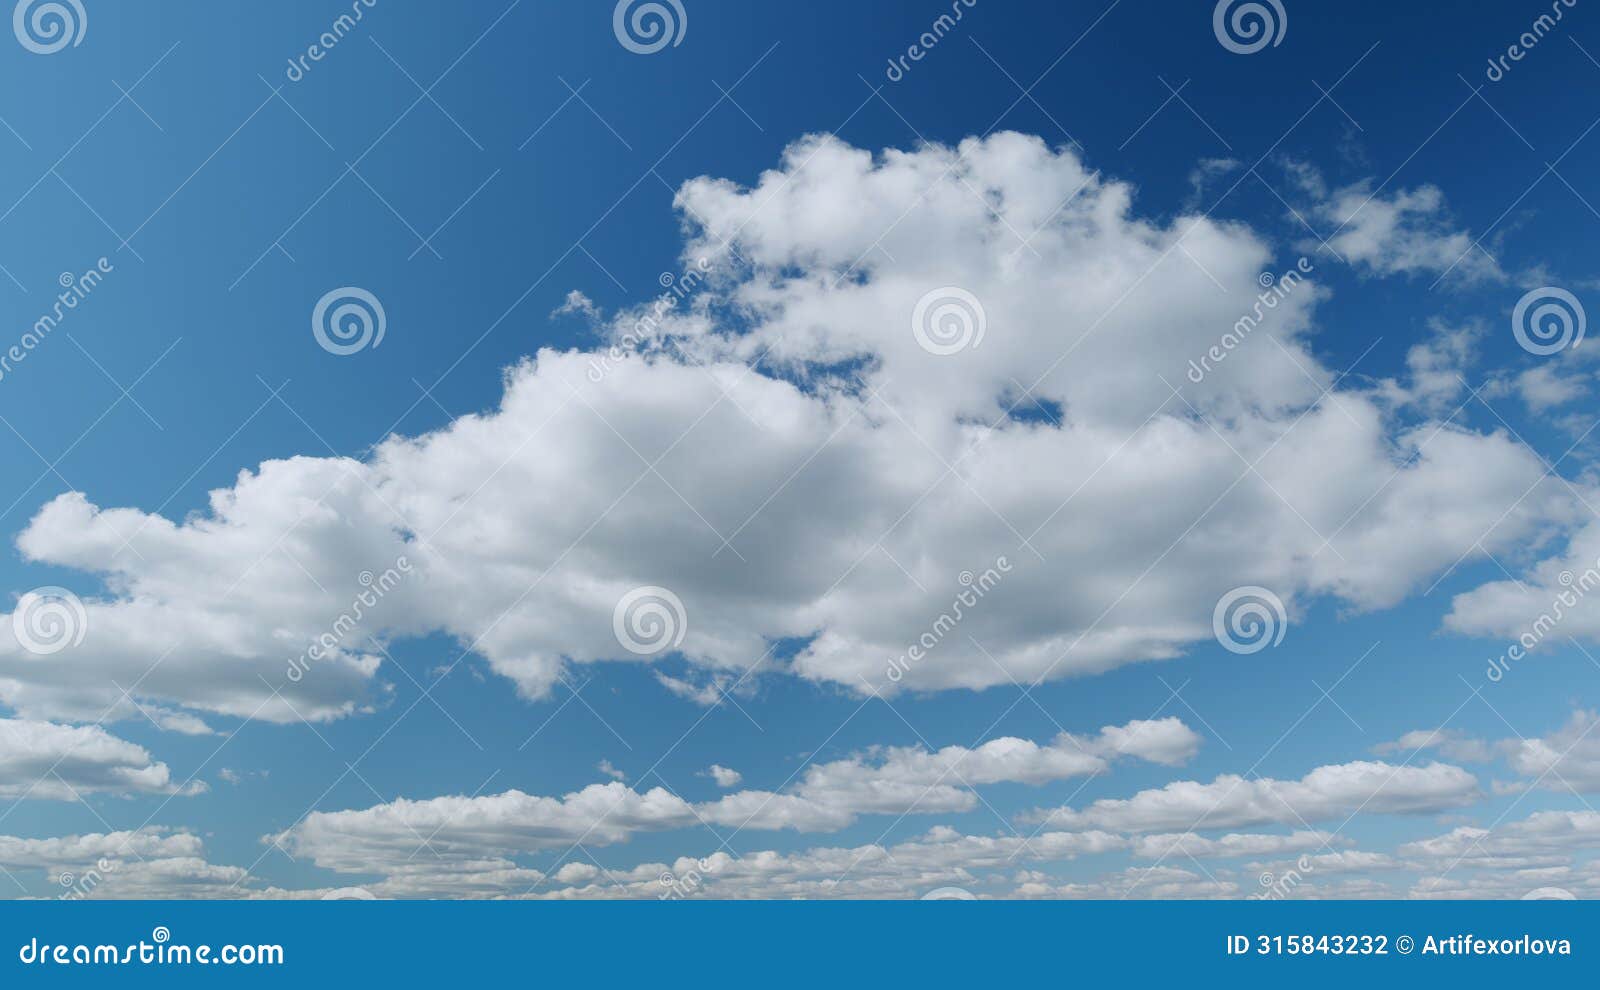 summer sky. stratus and stratocumulus clouds on bright blue sky. wispy stratus clouds pass over blue sky in nature